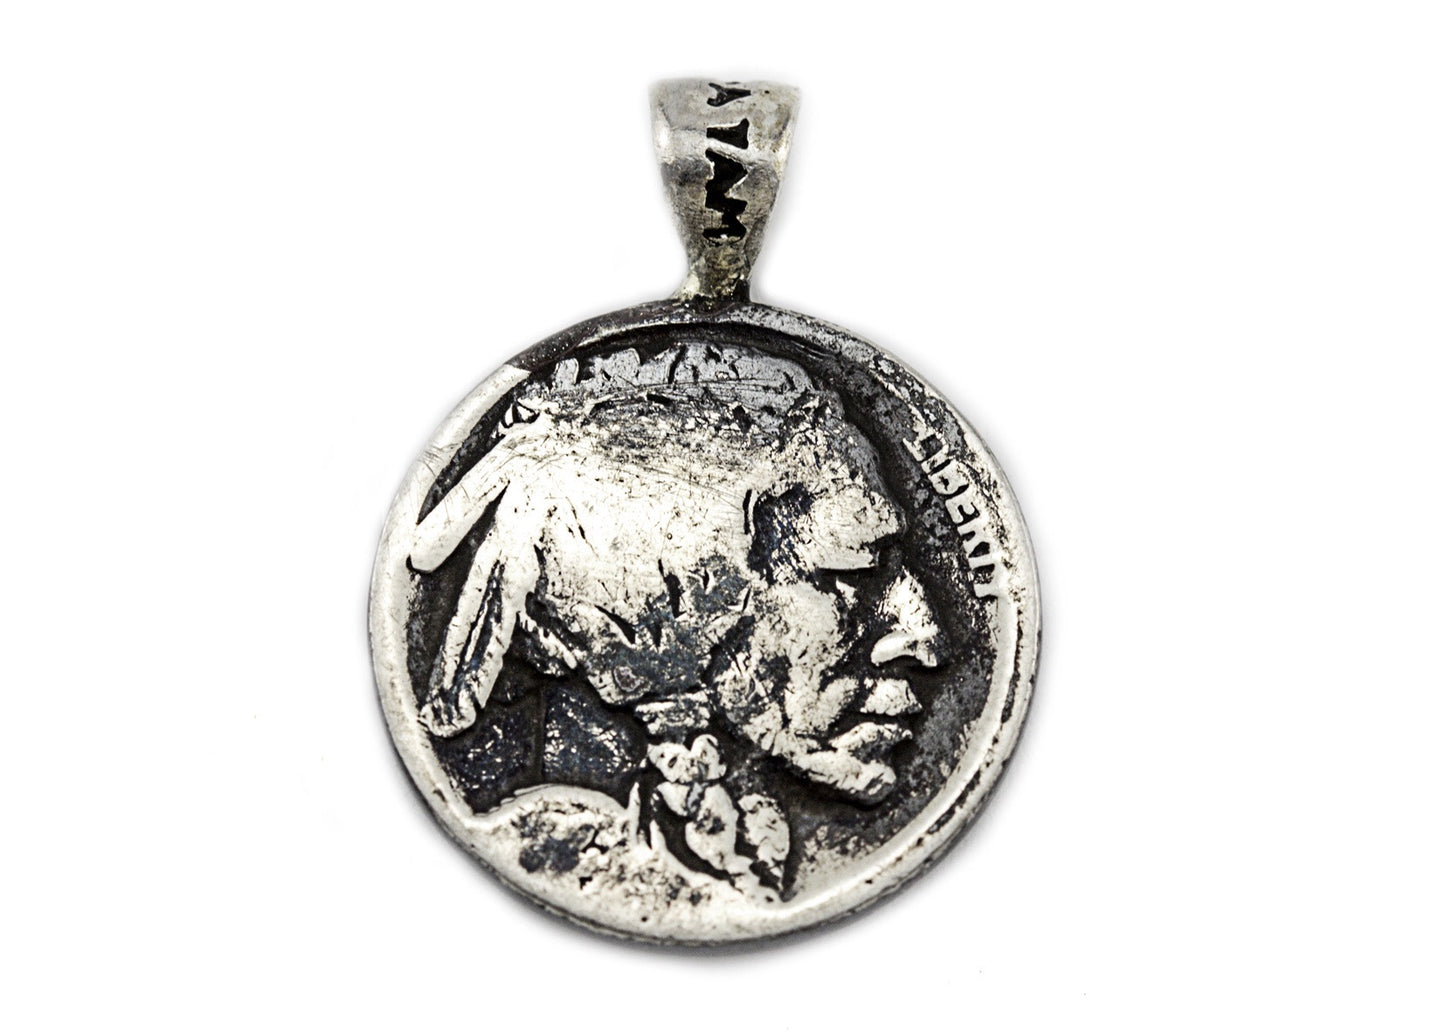 Thanksgiving Meditation coin medallion and the Buffalo Nickel coin of USA